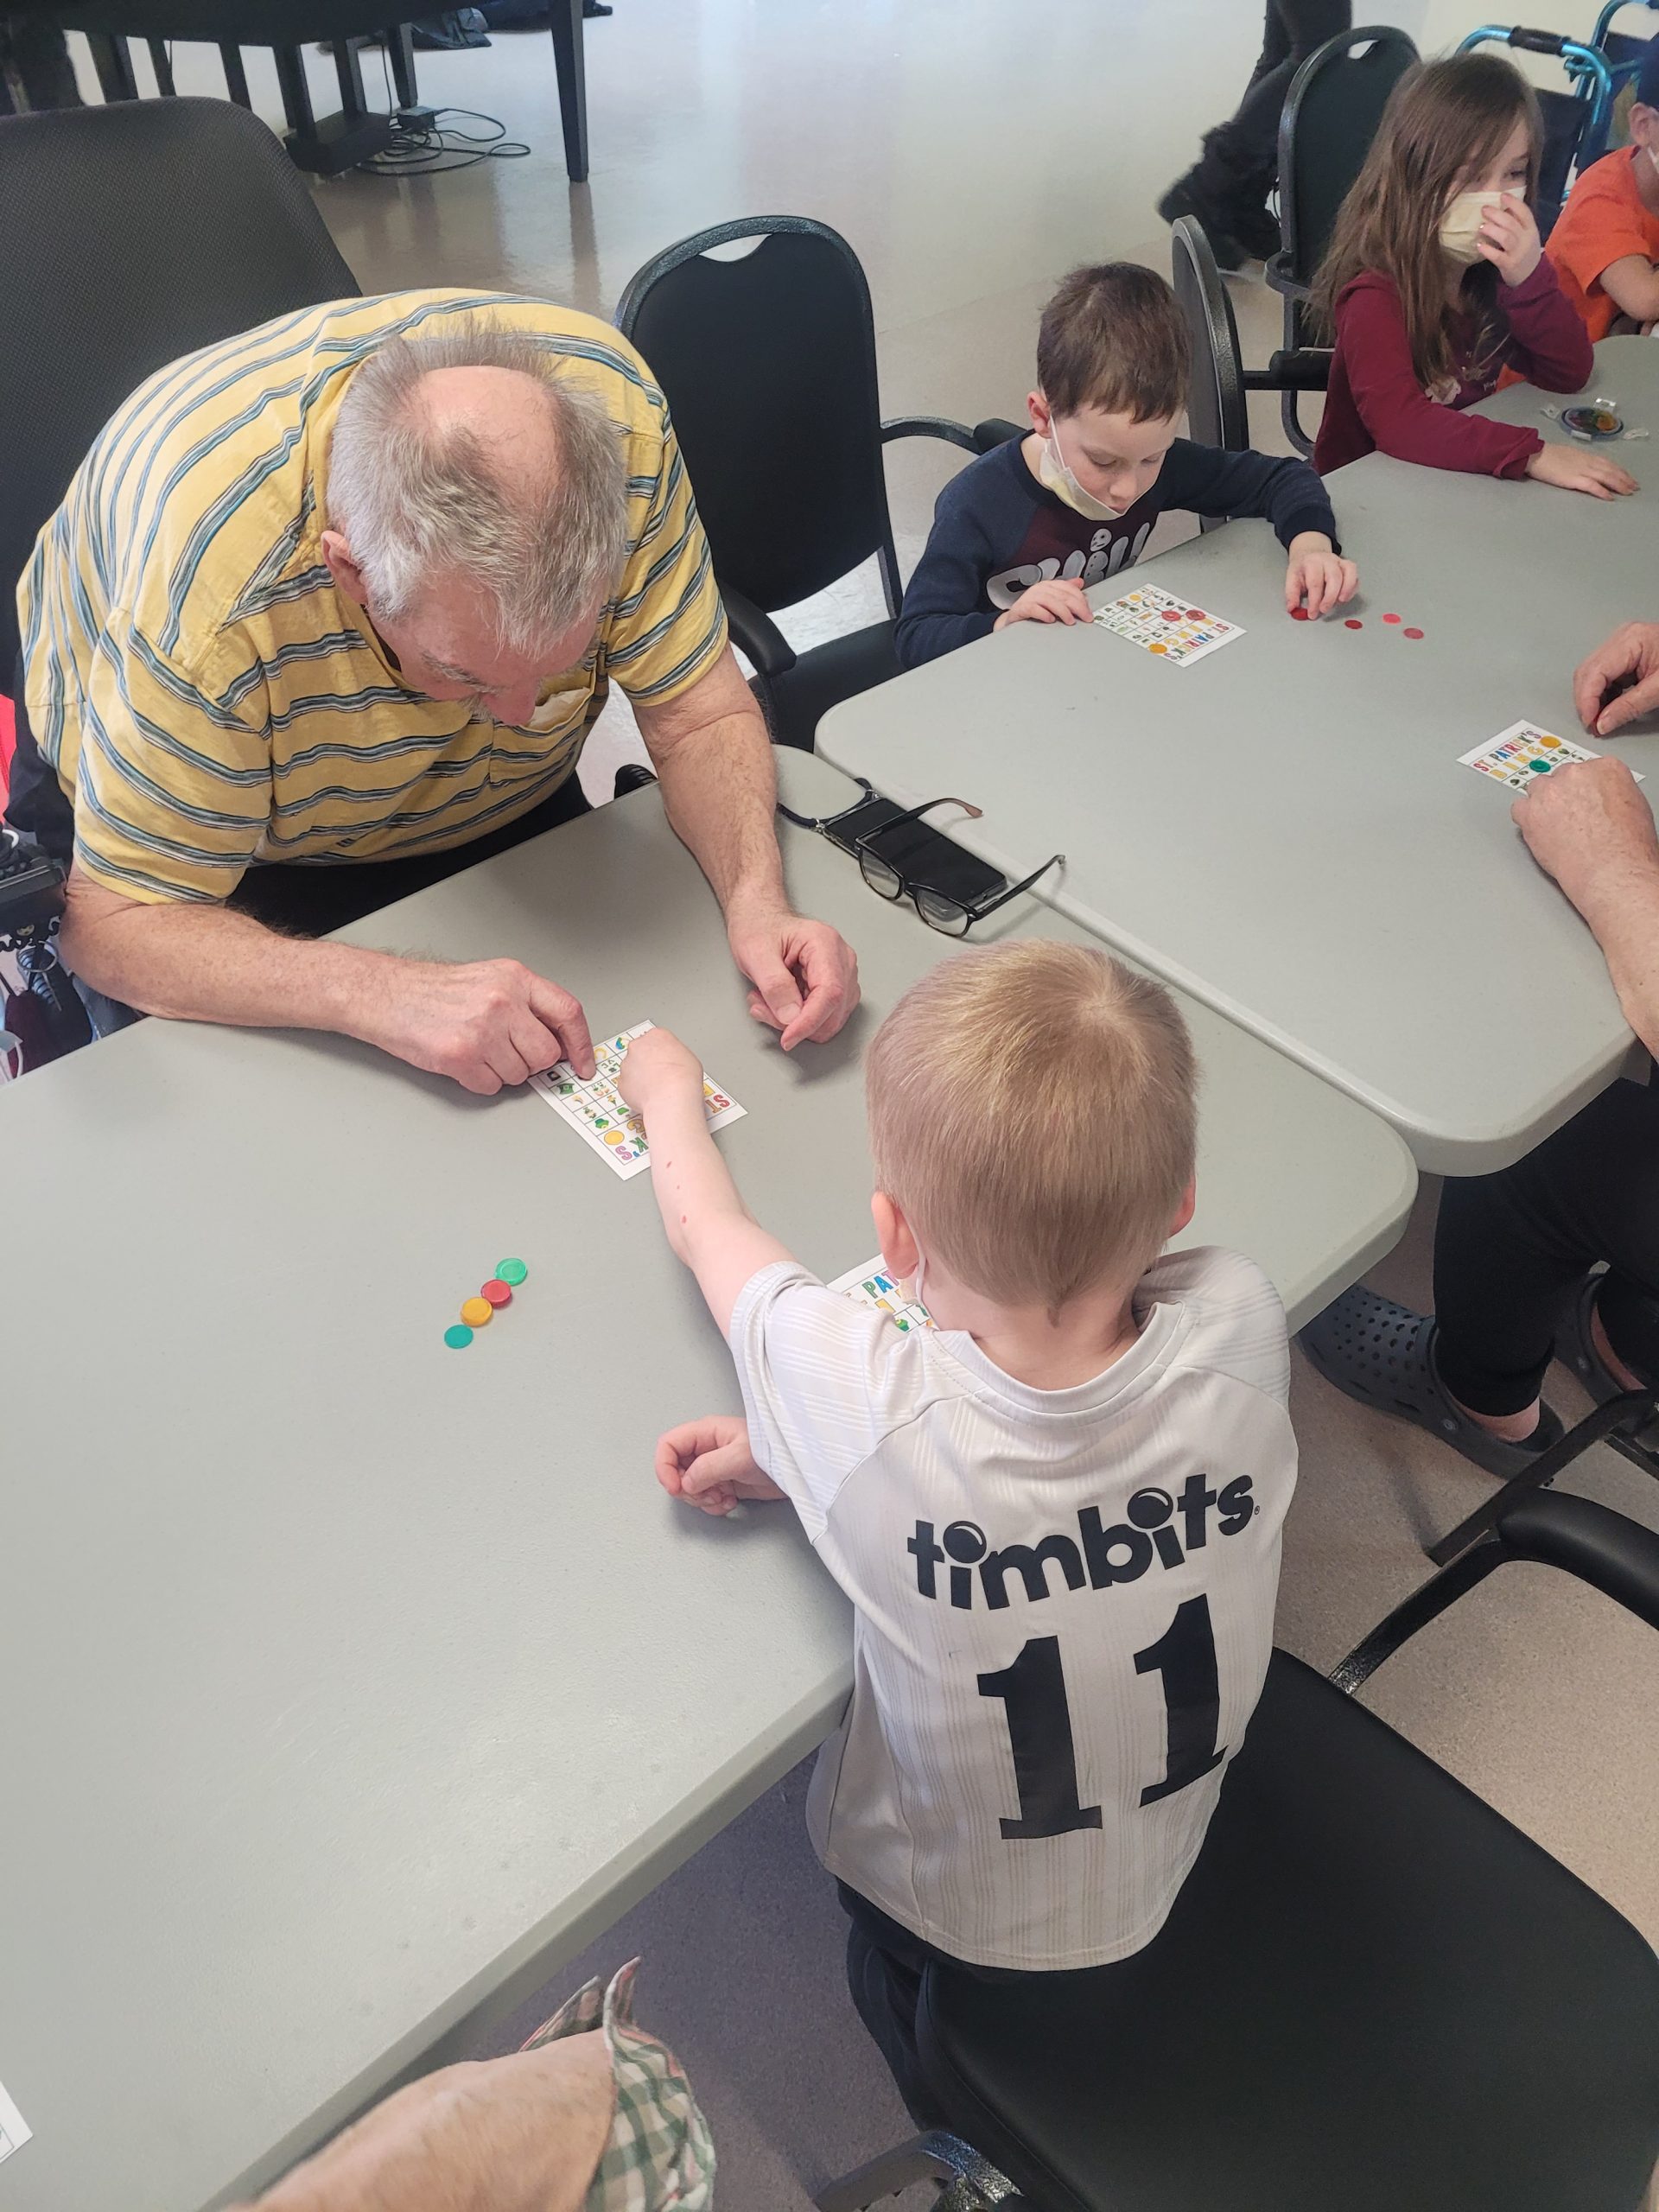 Barkers Point Elementary School students played Bingo, made bracelets, and sang songs to residents at Fredericton's York Care Centre (YCC) nursing home during two March visits.